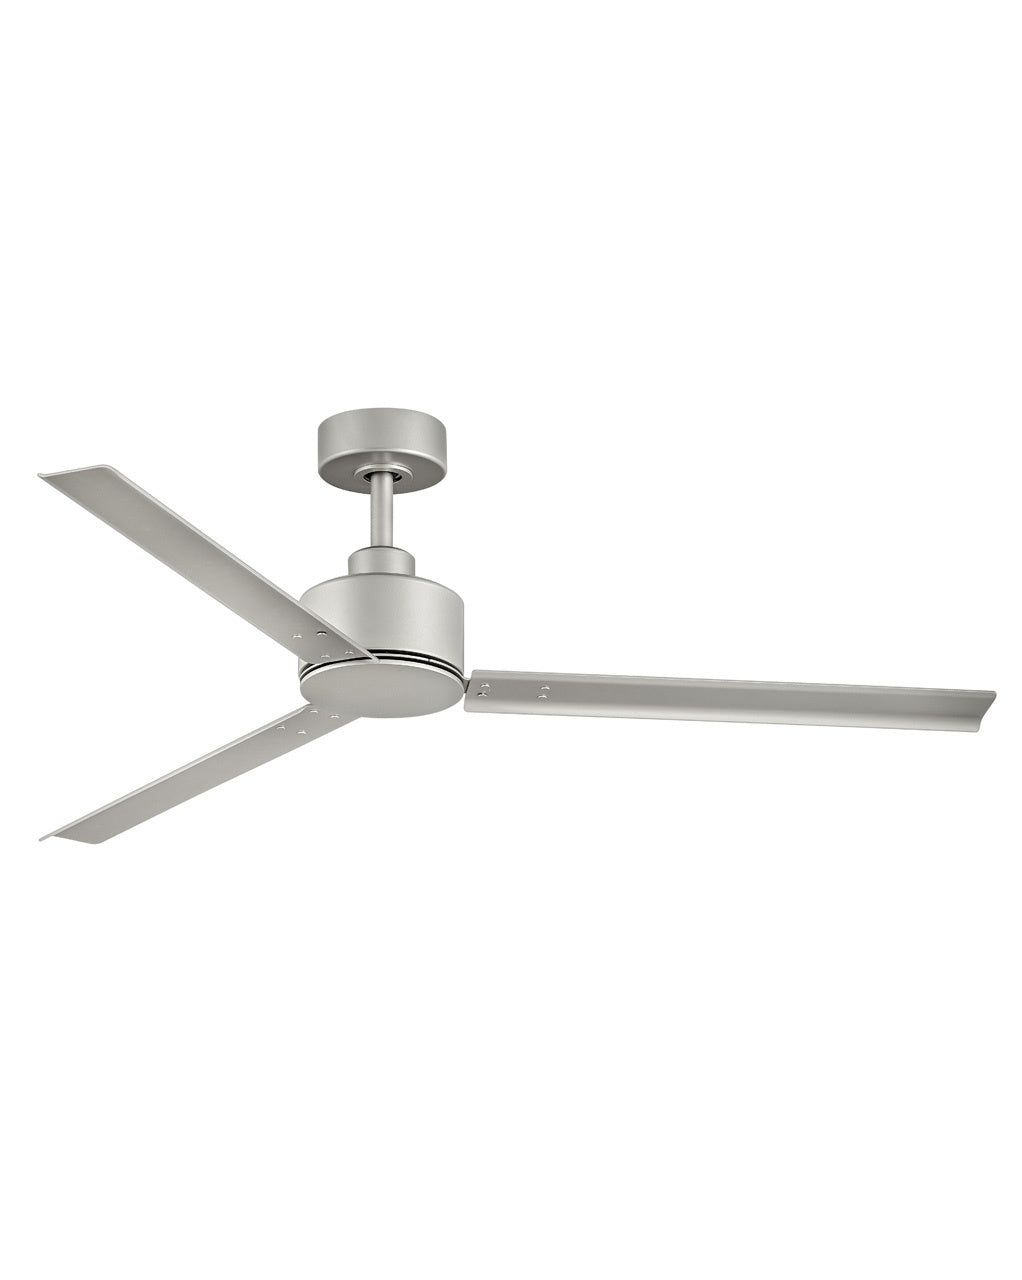 Hinkley Canada - 56``Ceiling Fan - Indy - Brushed Nickel- Union Lighting Luminaires Decor